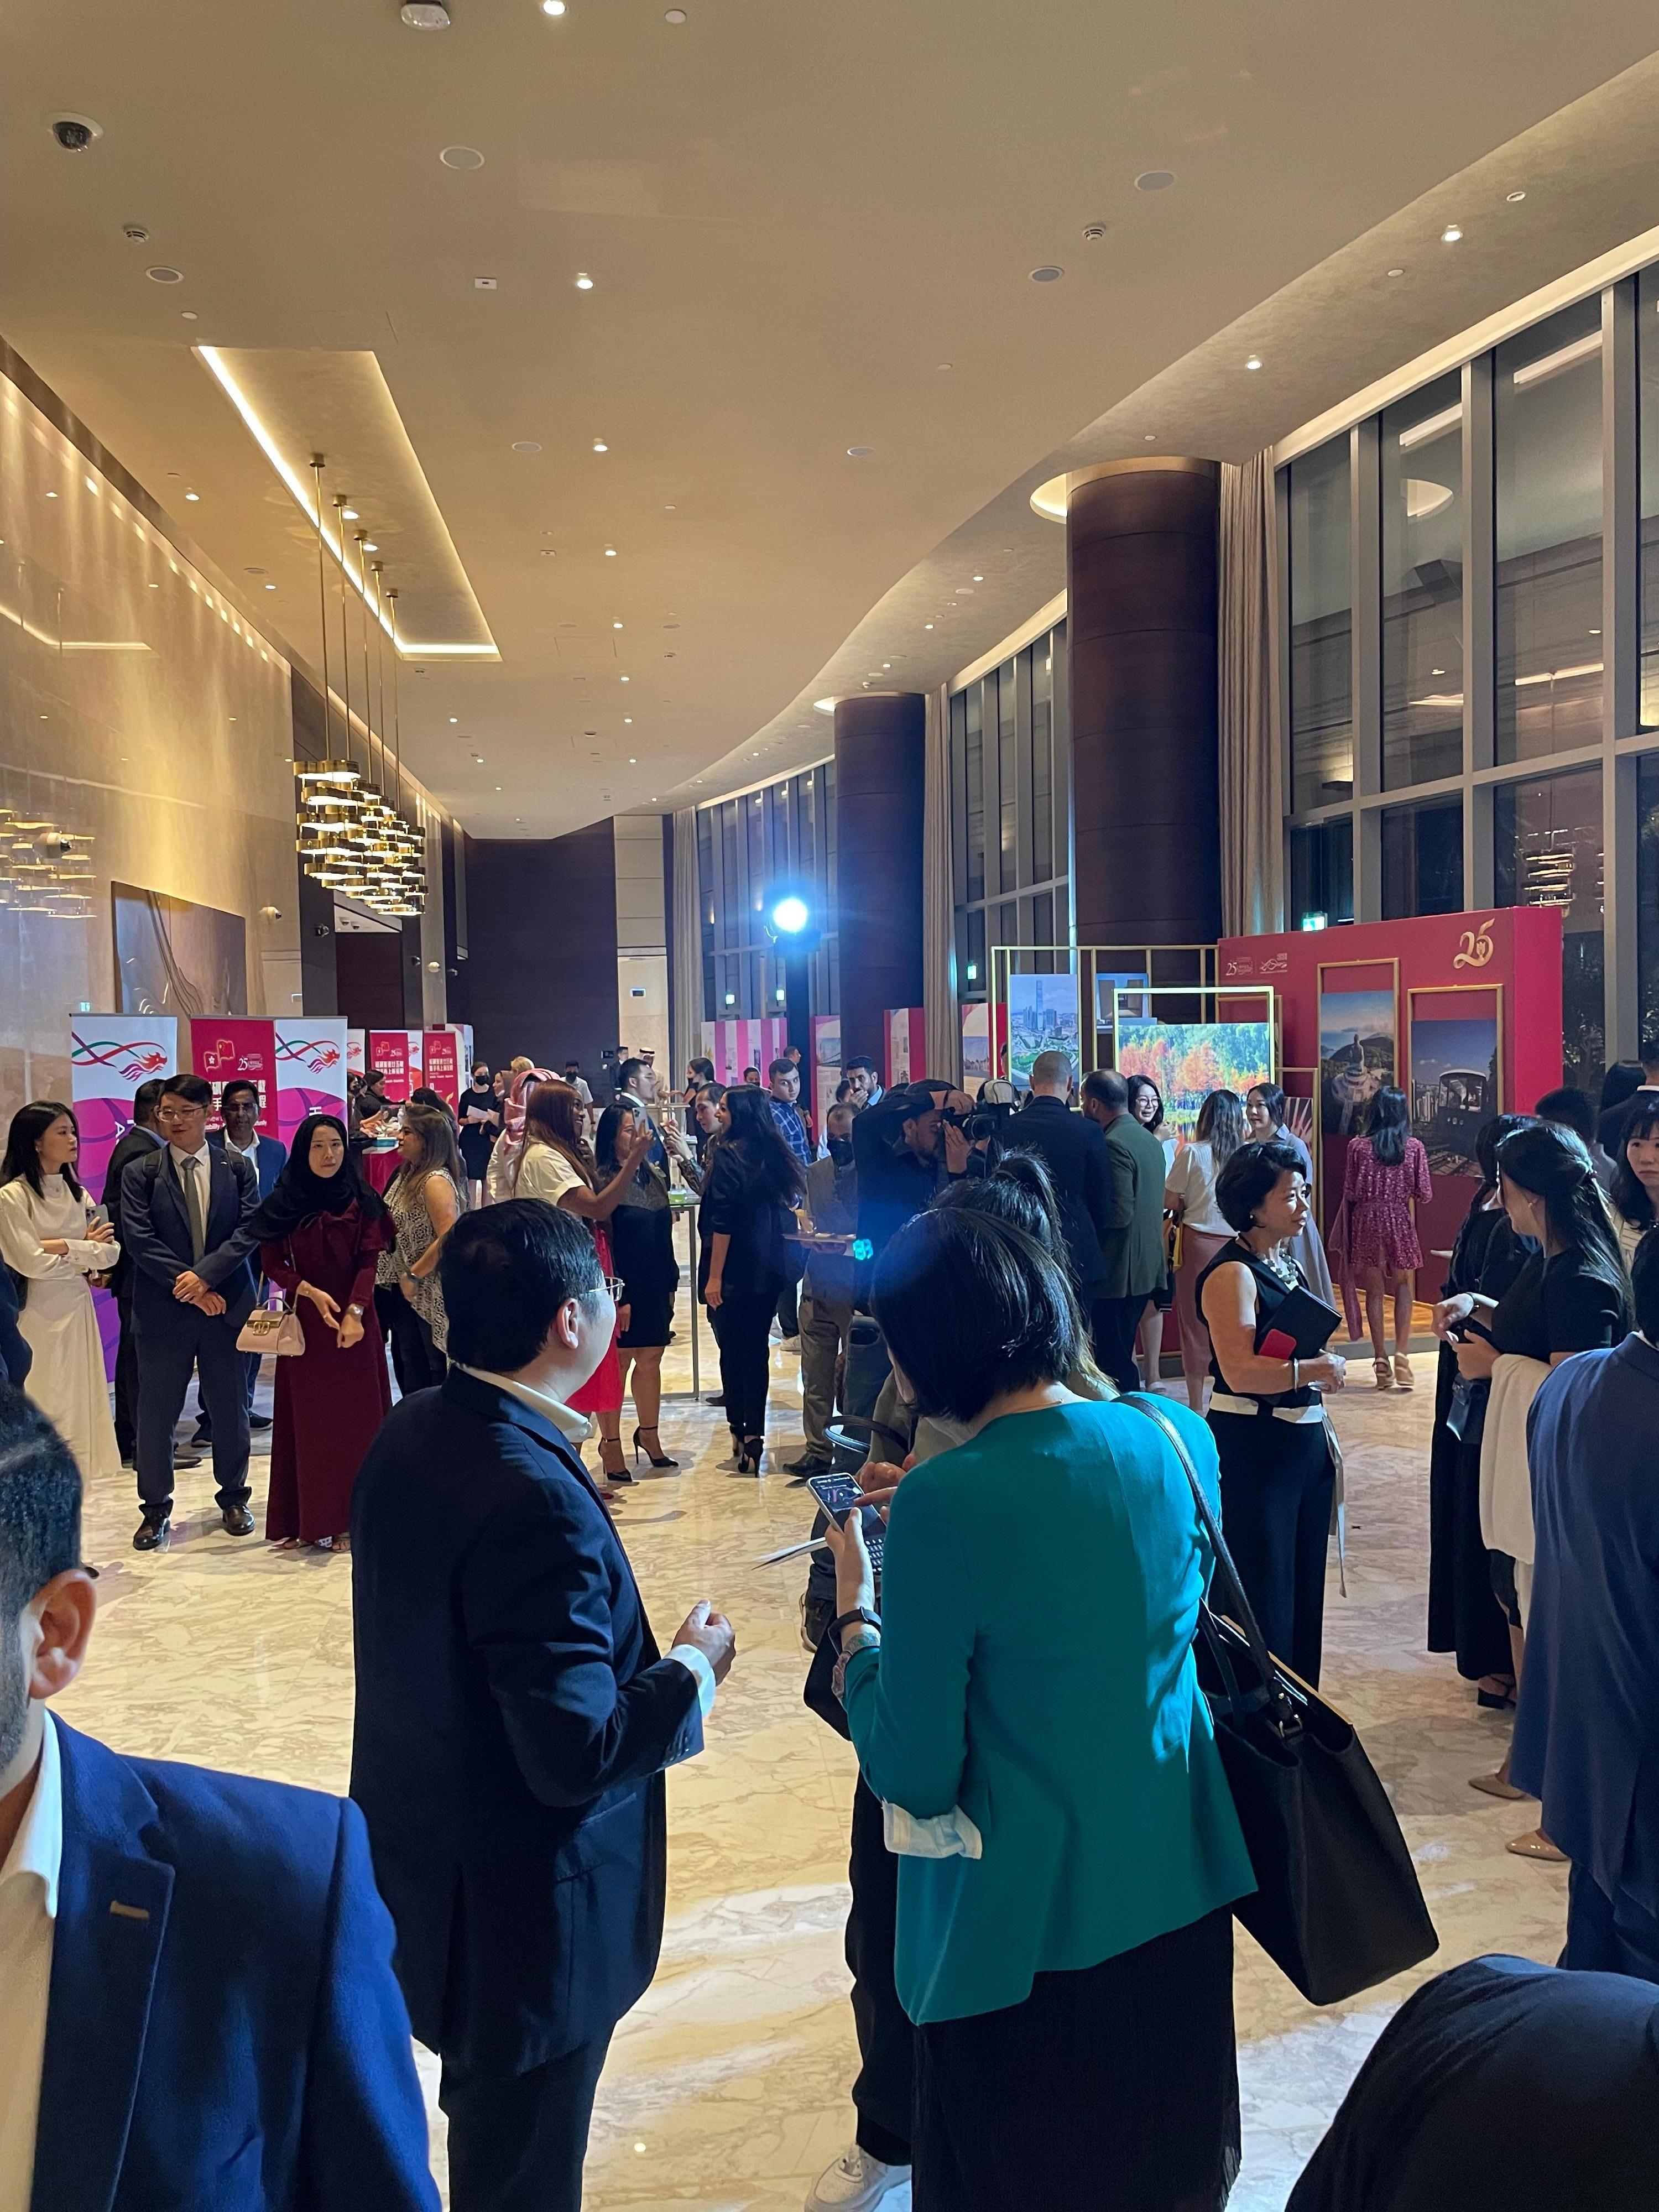 The Hong Kong Economic and Trade Office in Dubai held a gala dinner in Dubai on September 21 (Dubai time) to celebrate the 25th anniversary of the establishment of the Hong Kong Special Administrative Region. Photo shows guests networked at the reception before the dinner.